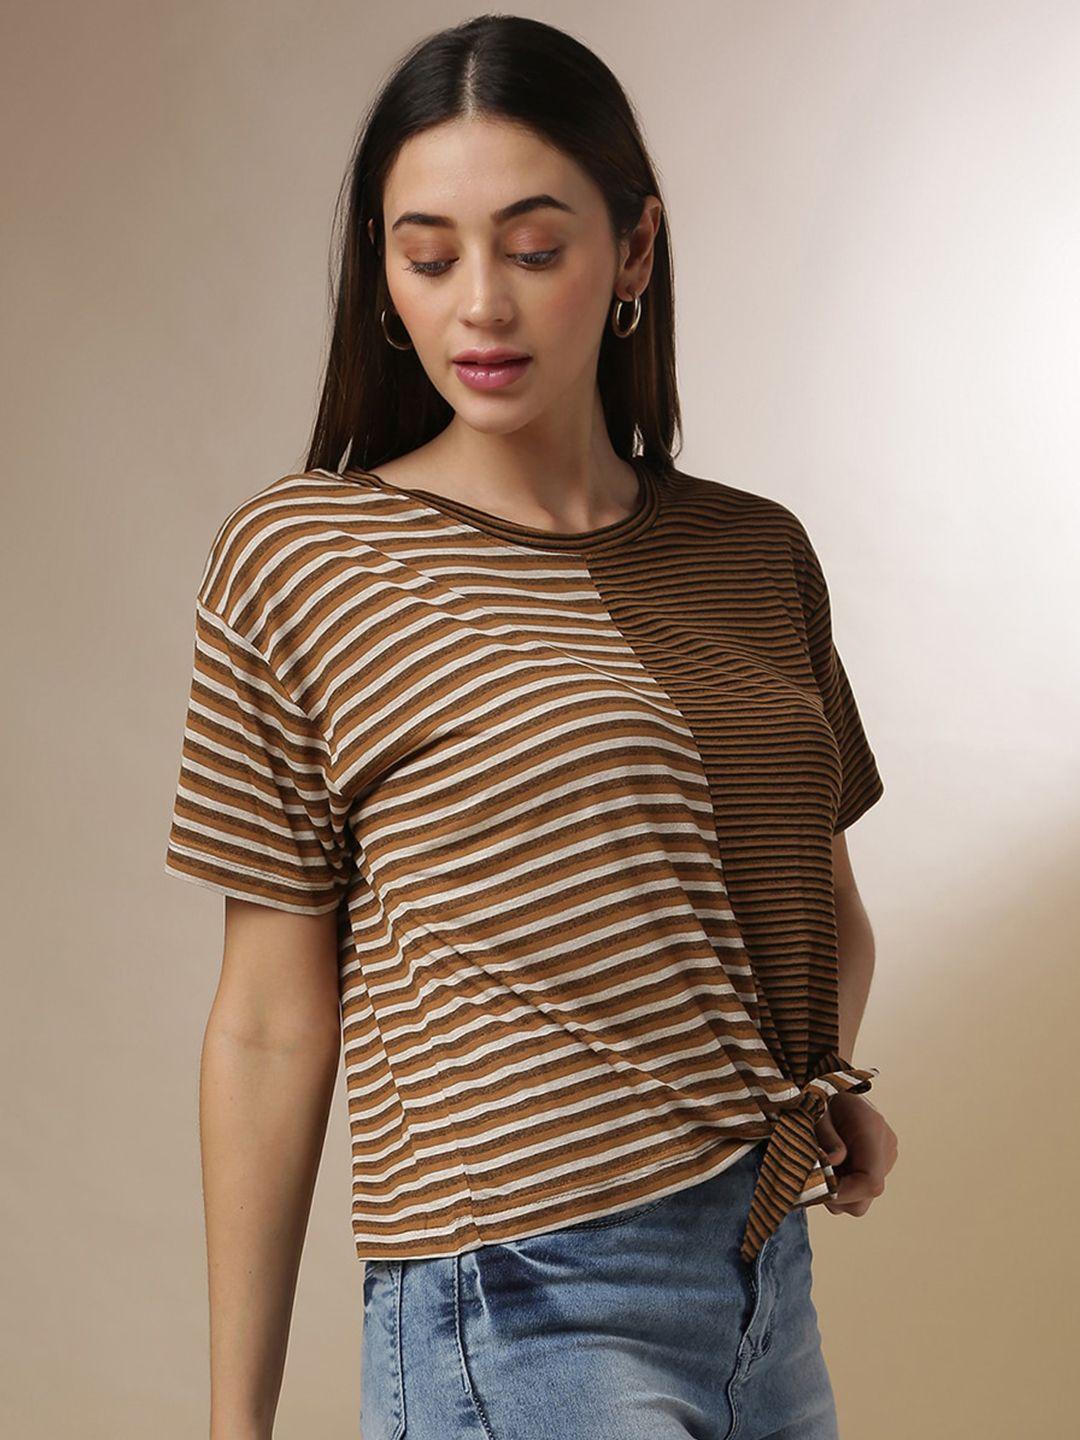 campus sutra brown striped extended sleeves regular top